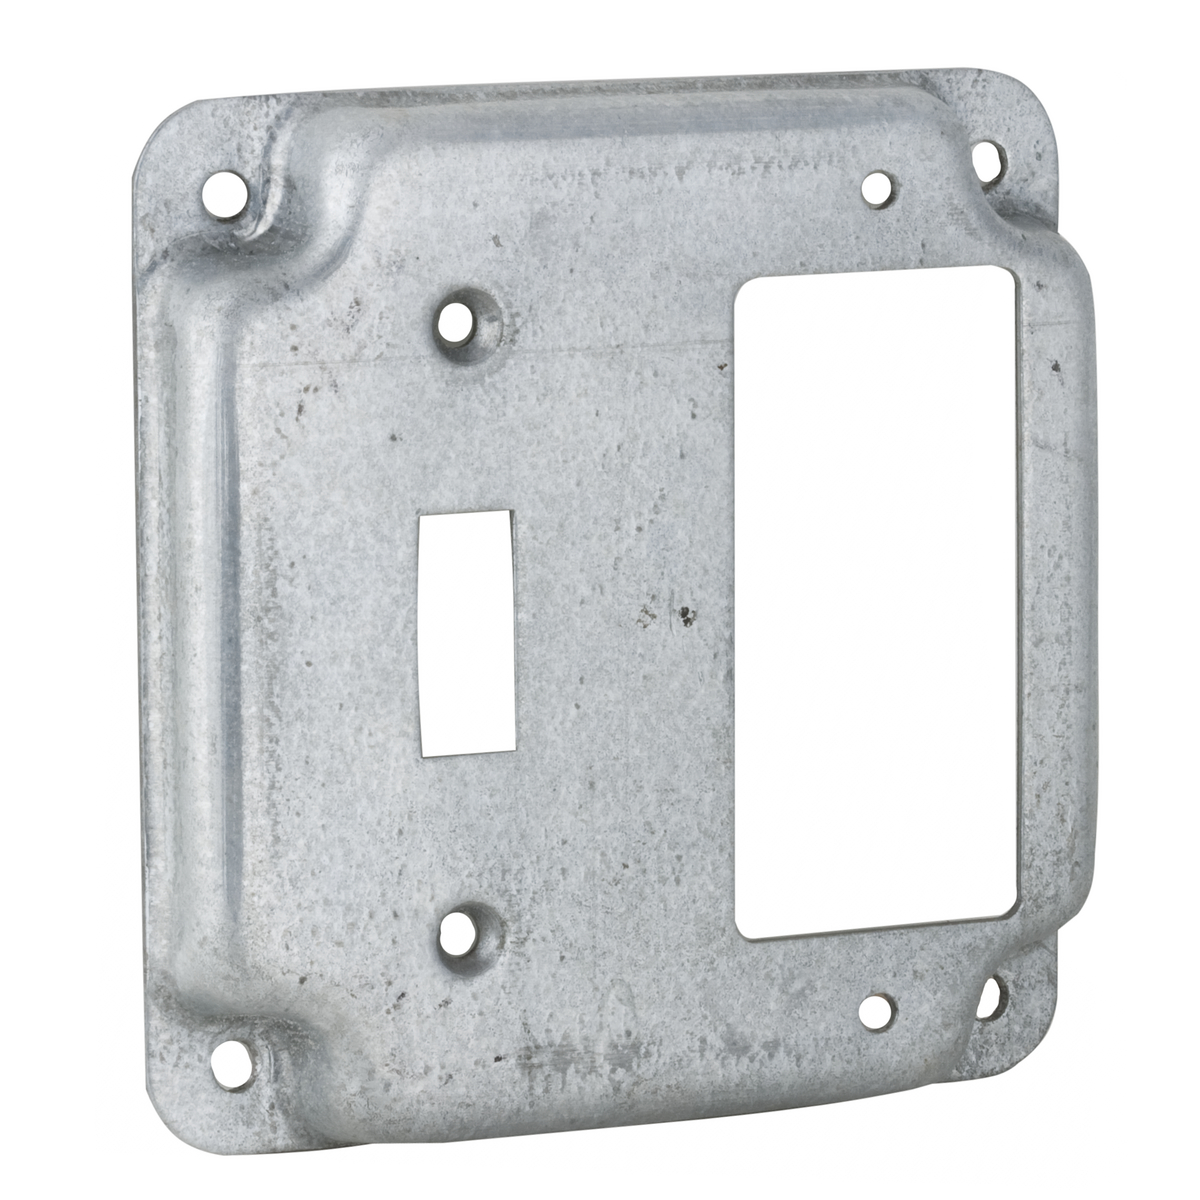 4 In. Square Exposed Work Covers - Raised 1/2 In., 1 GFCI and 1 ToggleSwitch